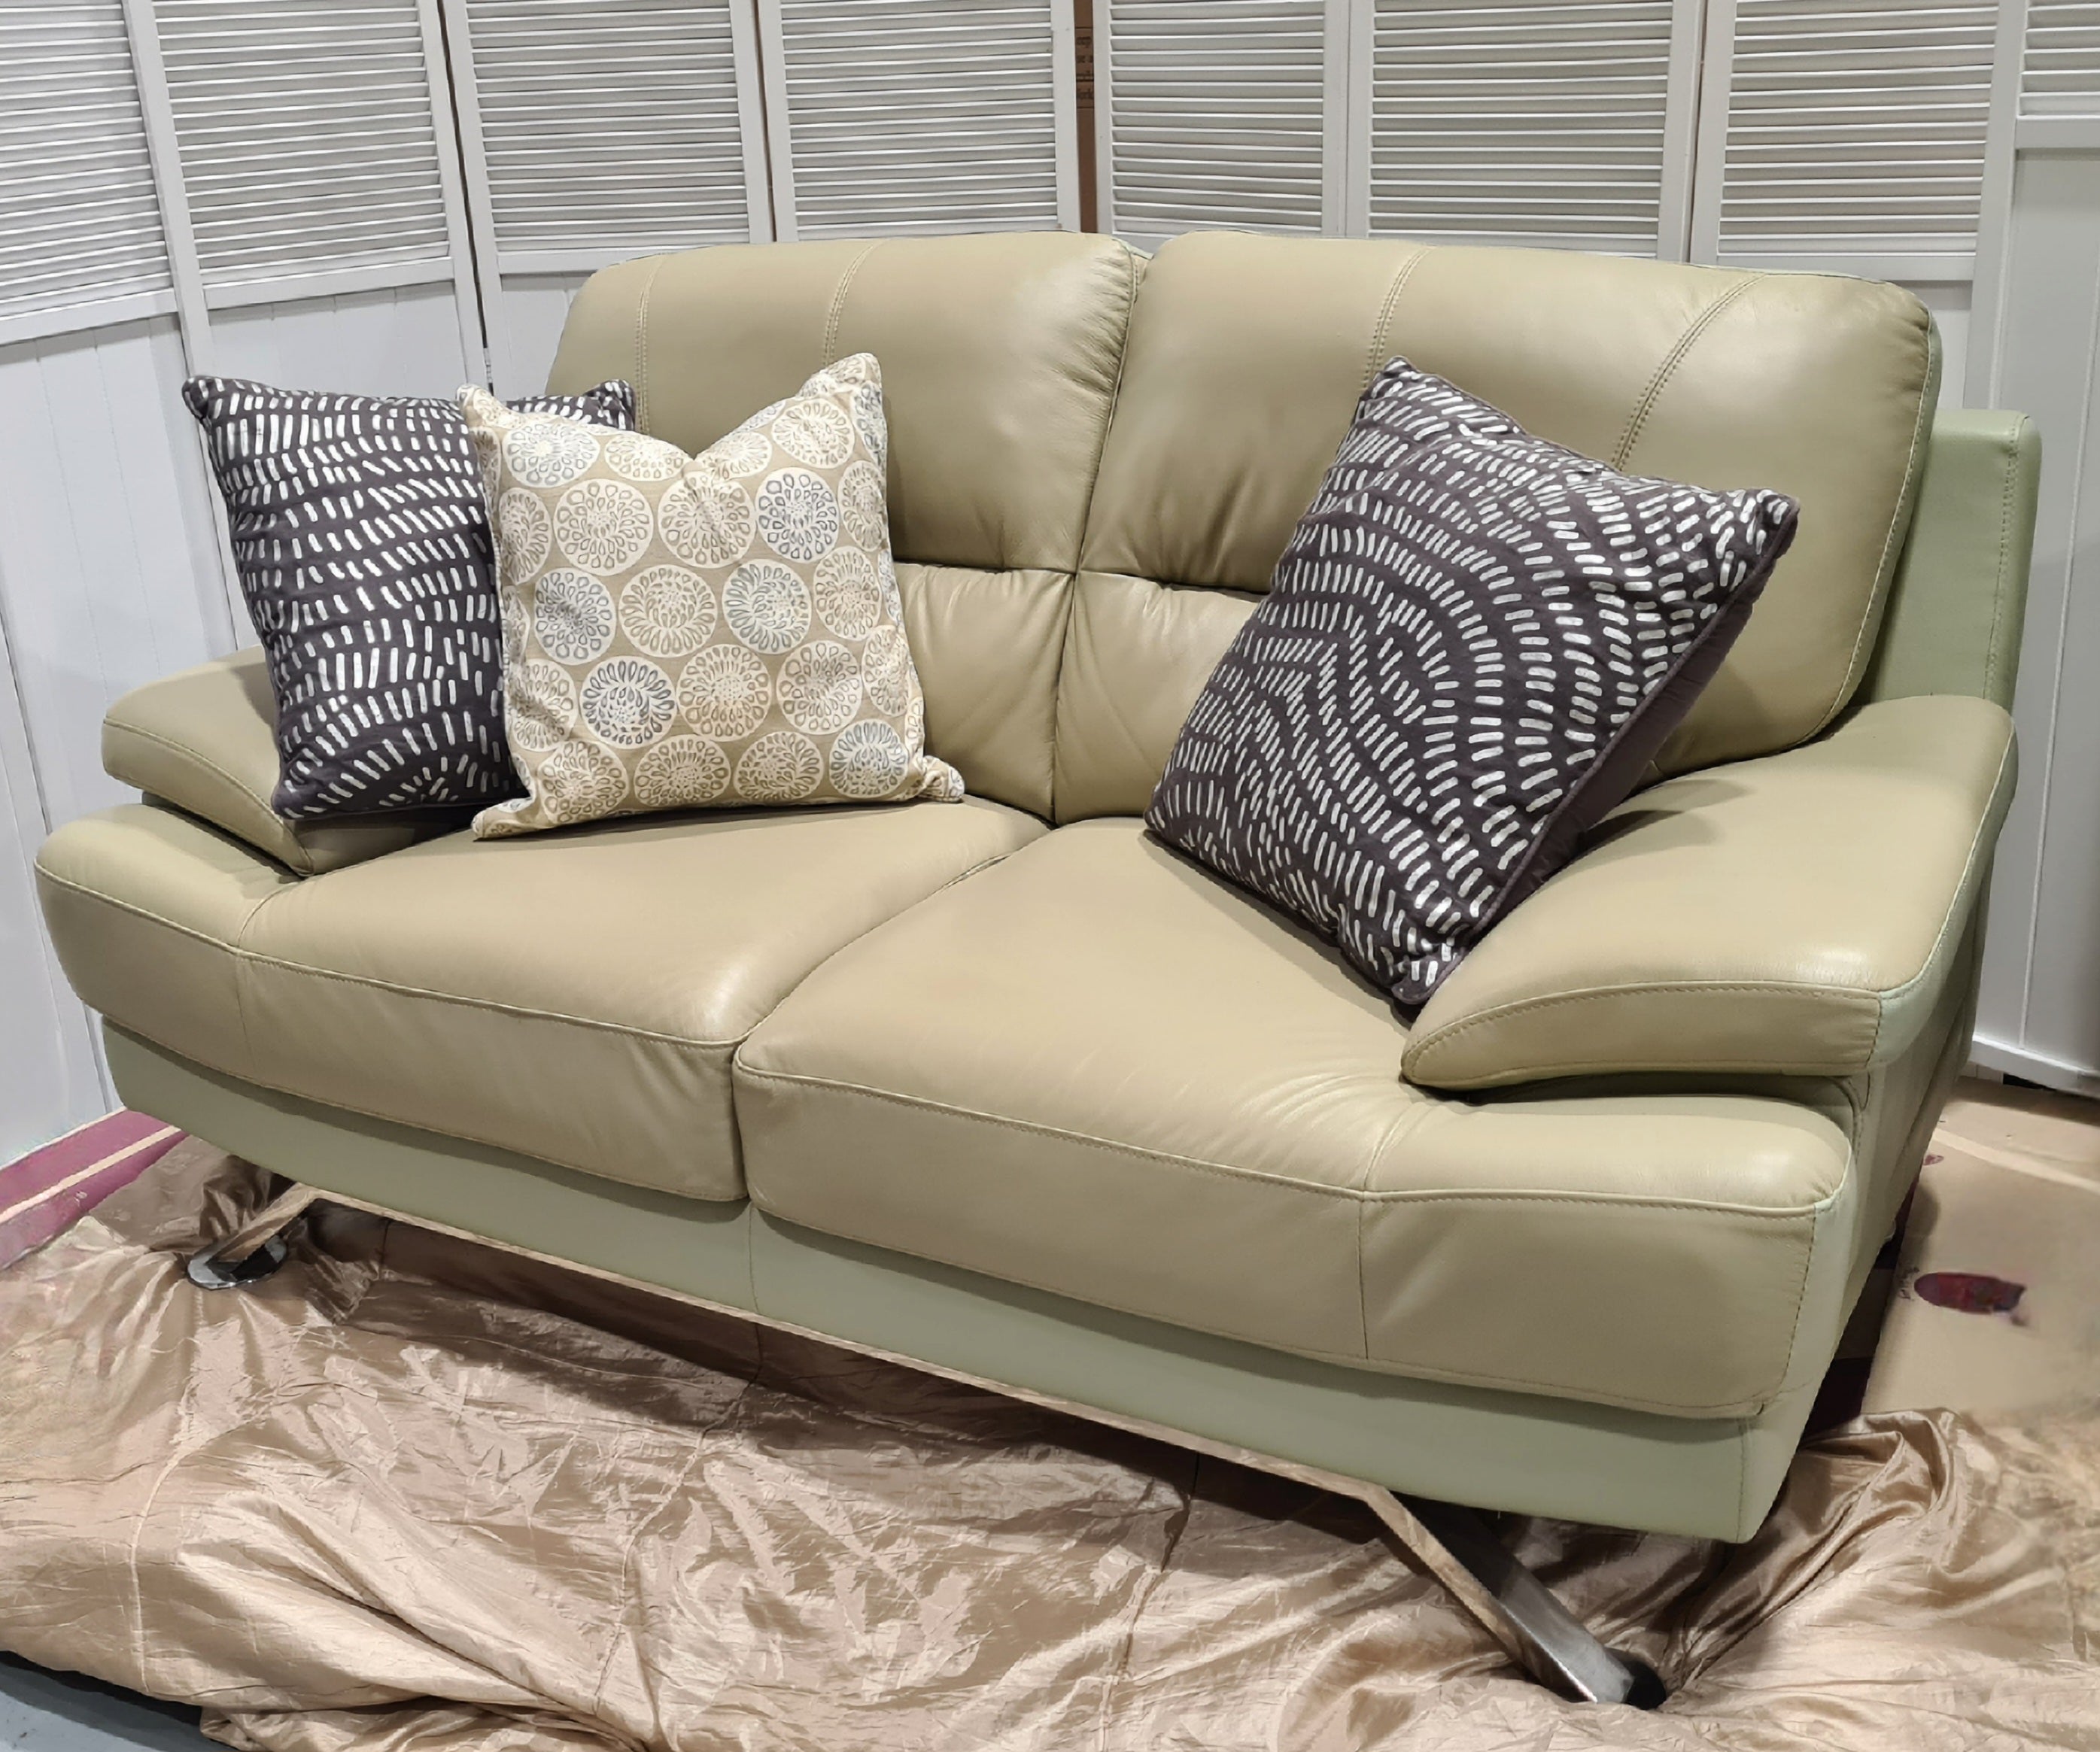 Leather Taupe/Olive green 2 Seater Sofa - $33 / week (6 week hire)